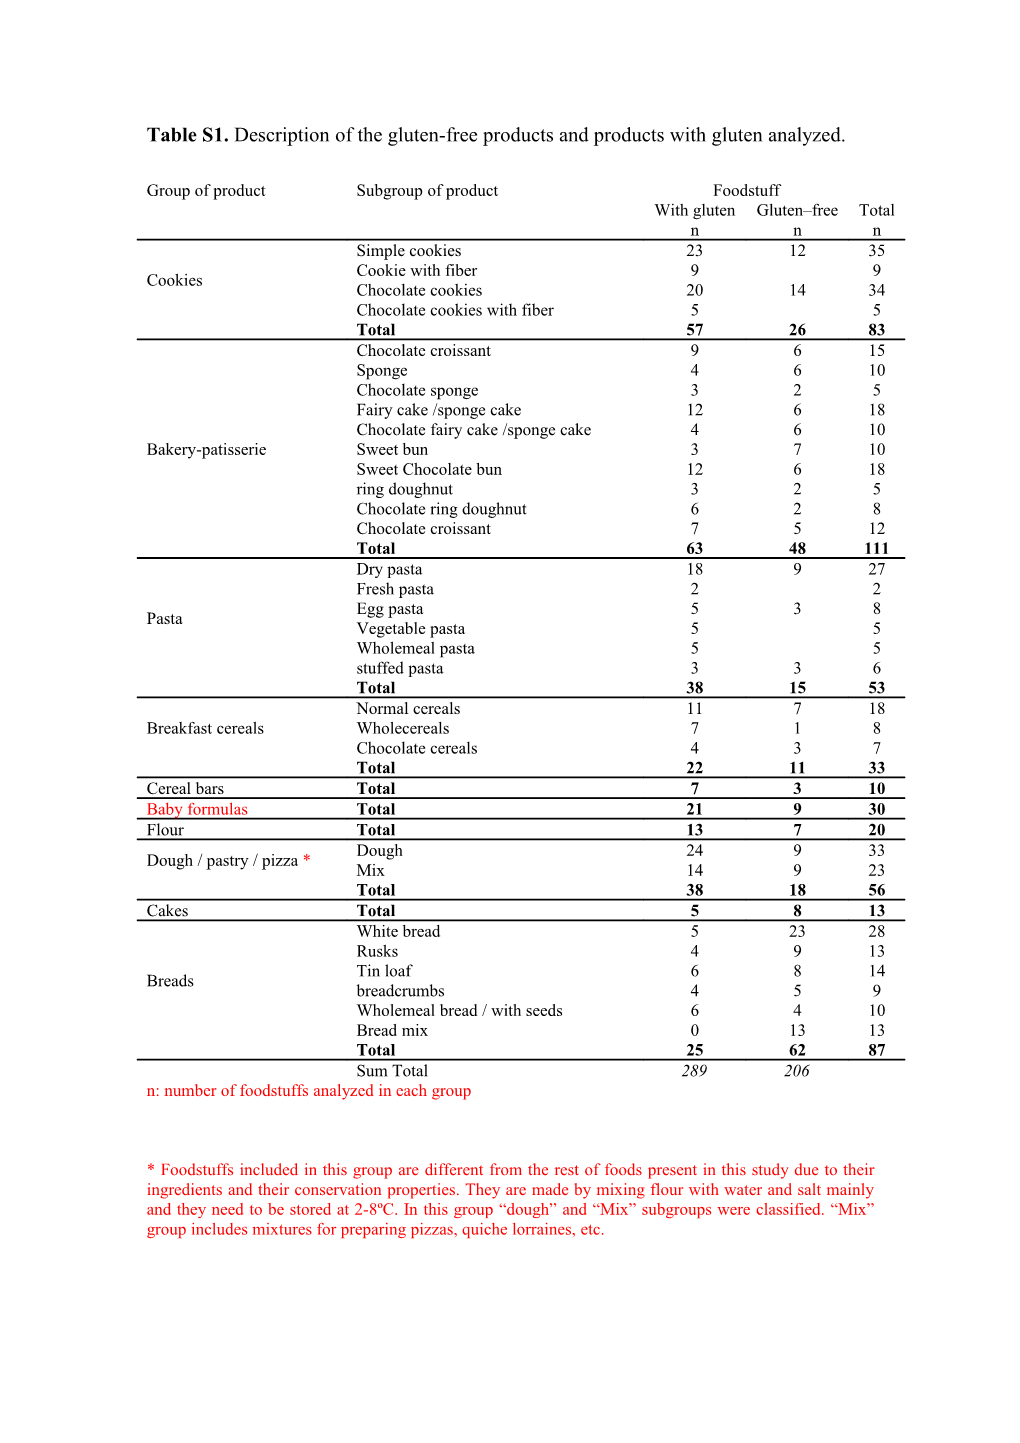 Table S1. Description of the Gluten-Free Products and Products with Gluten Analyzed